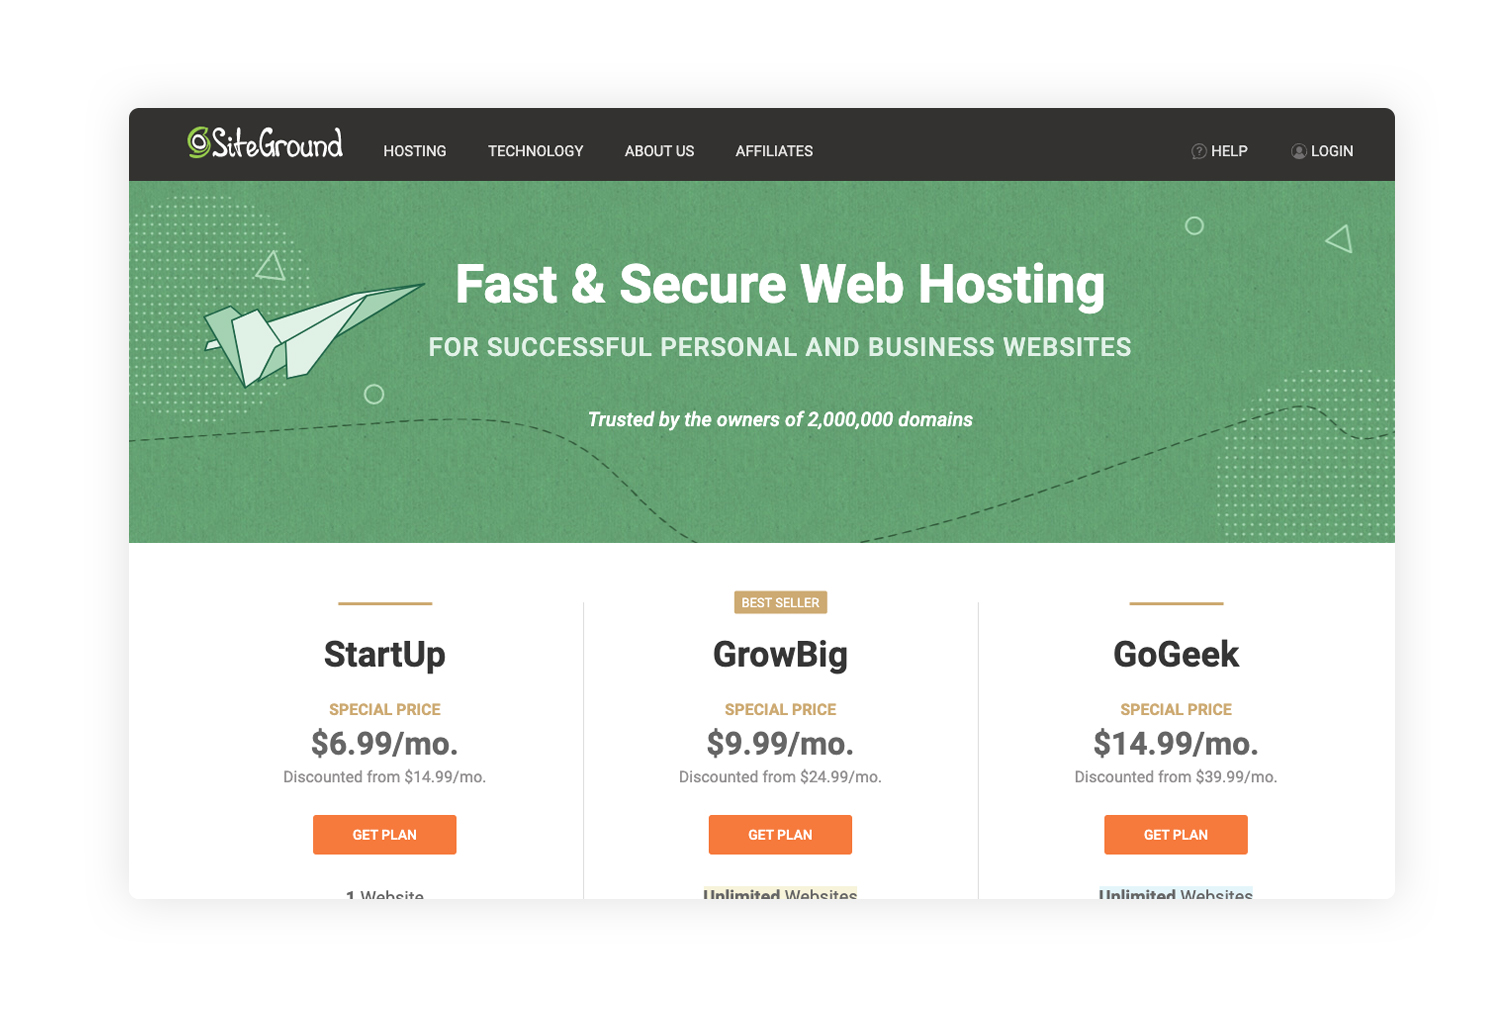 SiteGround is a hosting provider